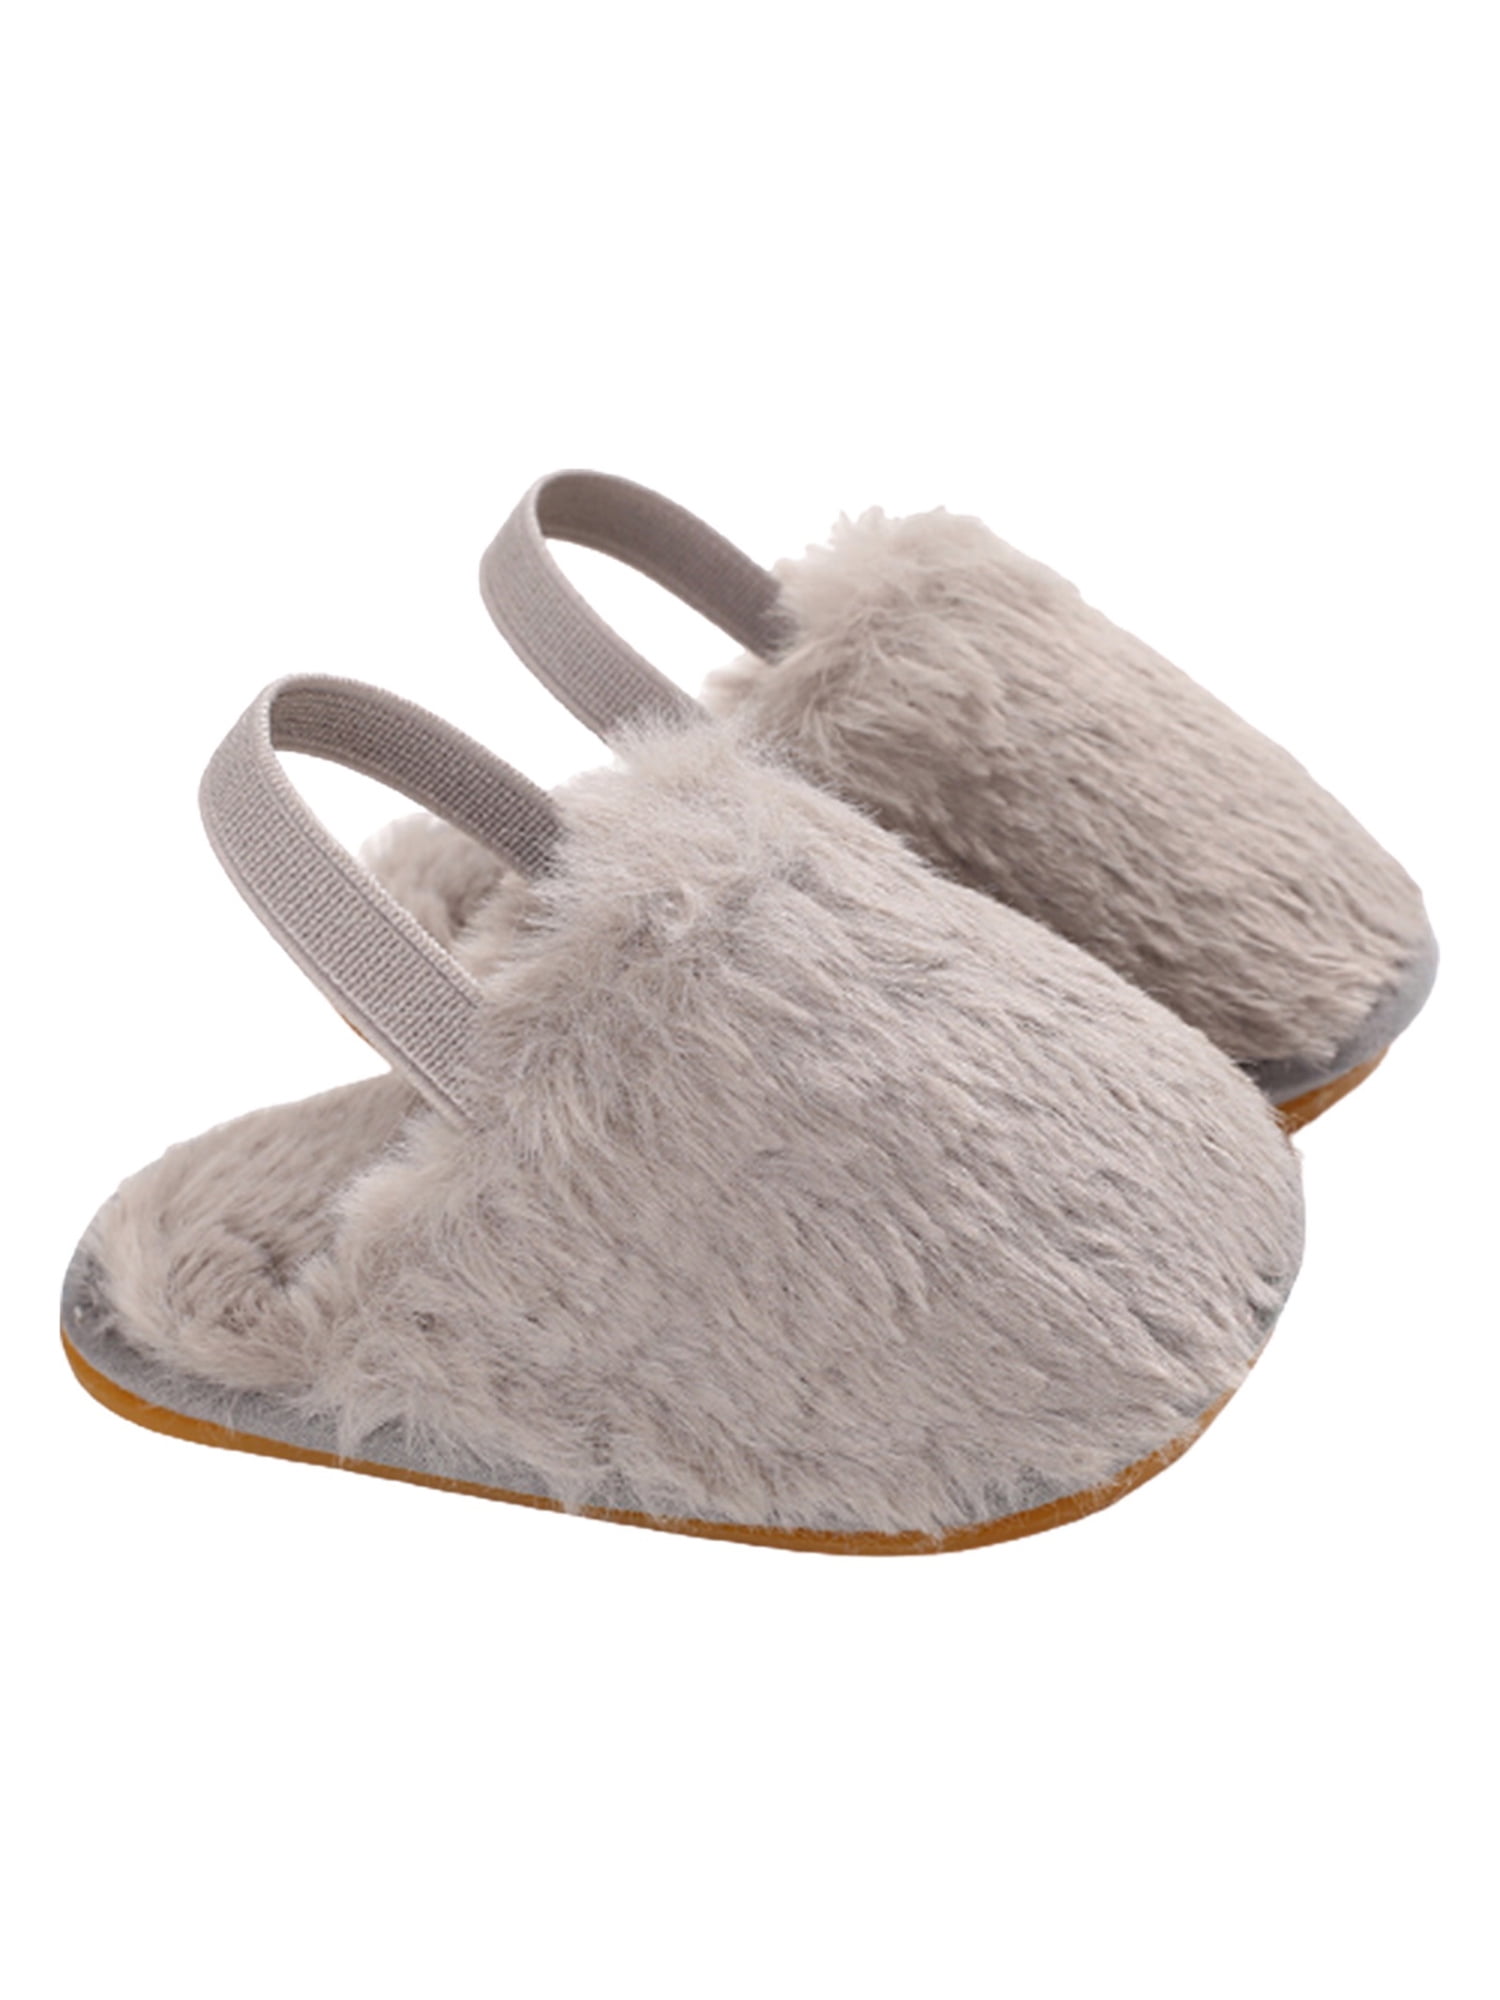 Morrivoe Infant Baby Faux Fur First Walkers Shoes Soft Elastic Band Slipper Sandals for 3-6Month,6-9Month,9-12Month Casual Flats Shoes 